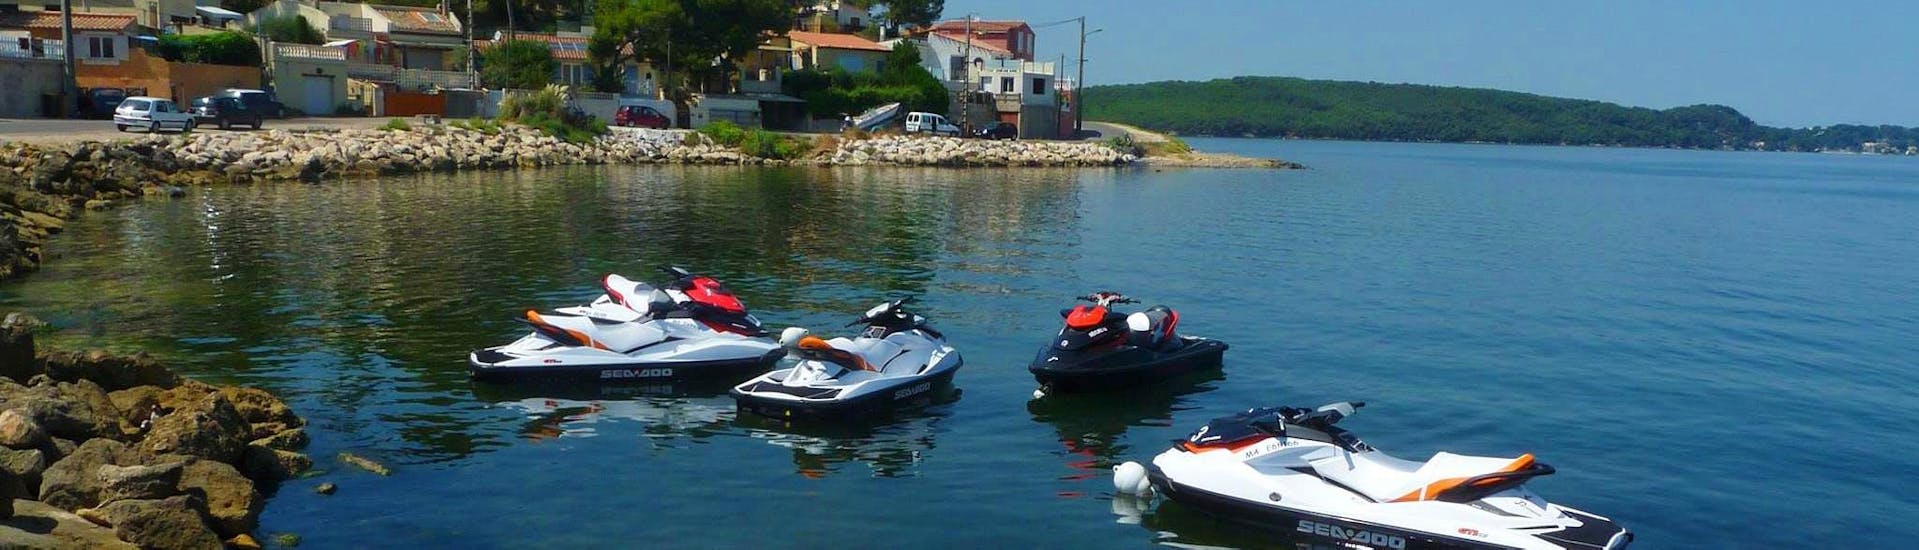 Tourists are enjoying the view from the coast over the Etang de Berre during the safari with the Jet Ski Aventure in Martigues.